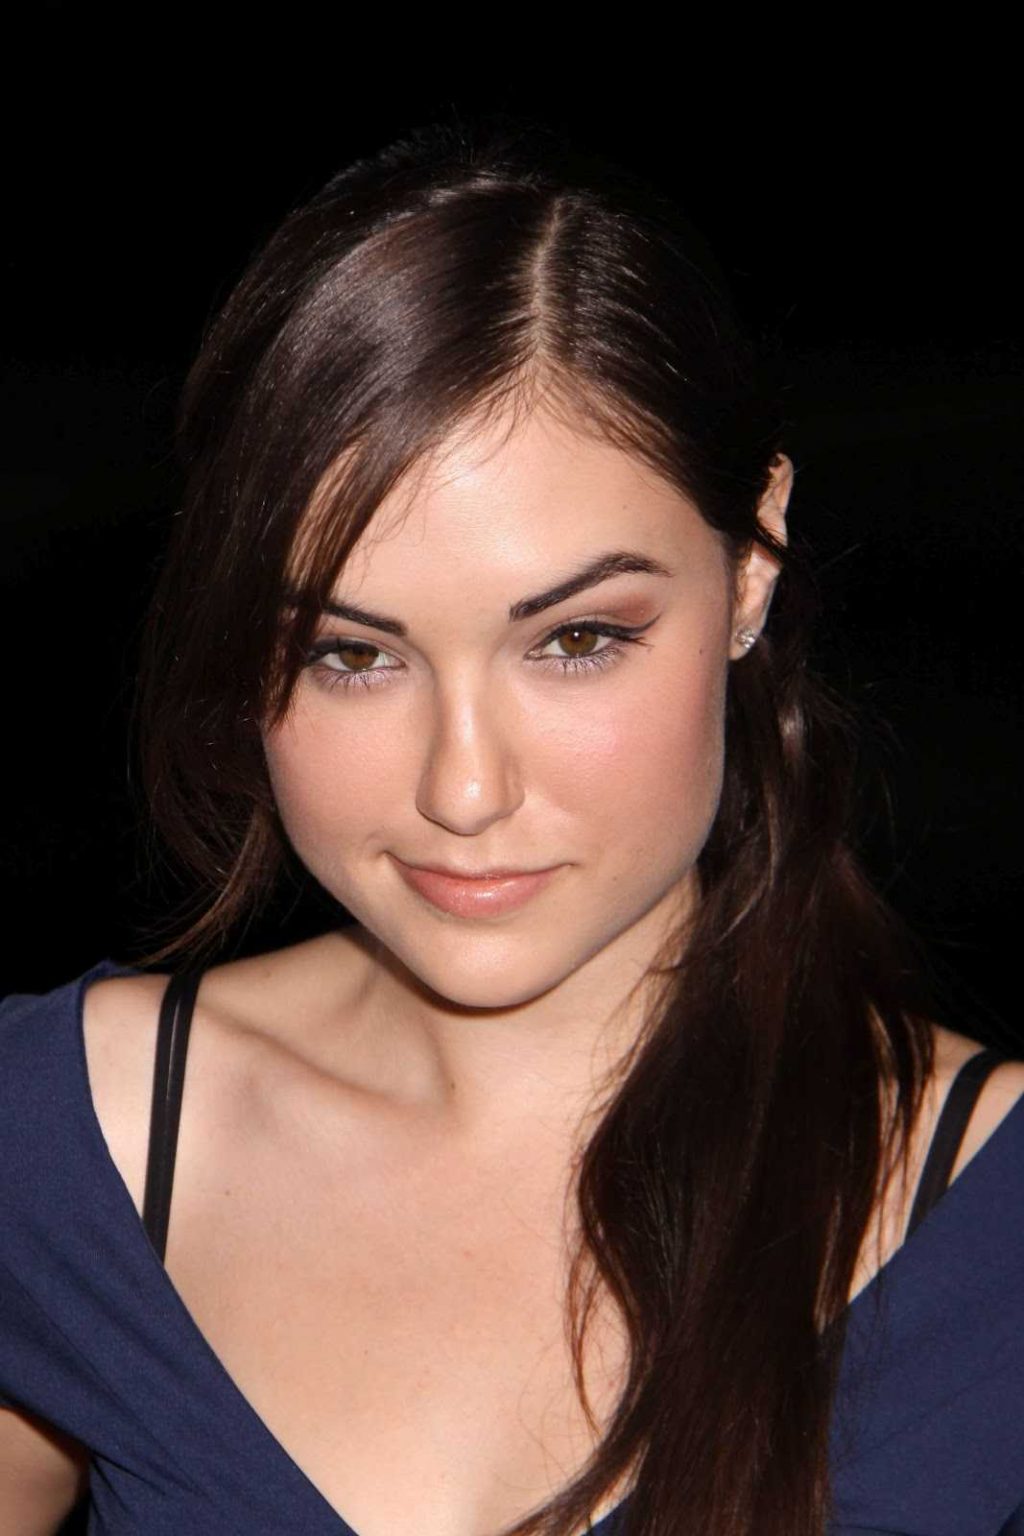 44 Sasha Grey Nude Pictures Can Be Pleasurable And Pleasing To Look At 11